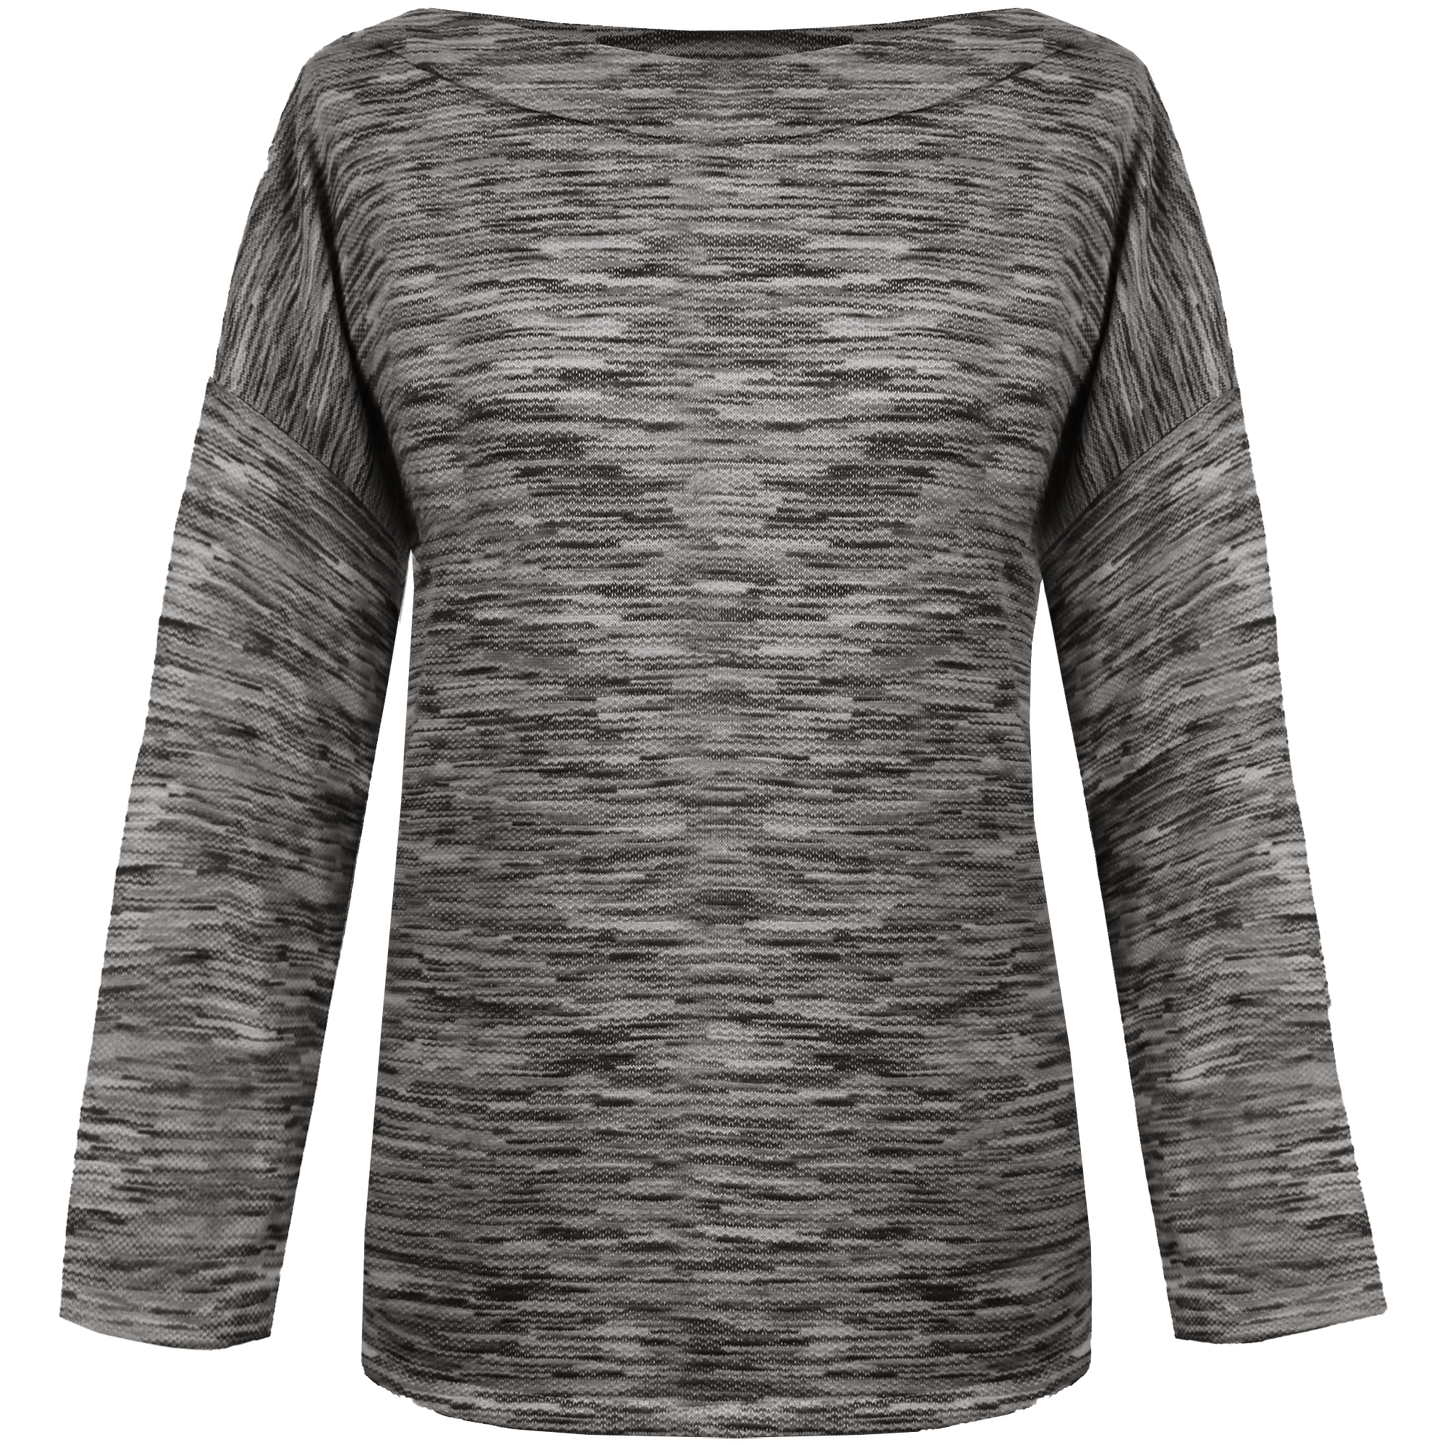 Grey Heather Blouse — Classic Uniforms Designs for Your Frontline Staff